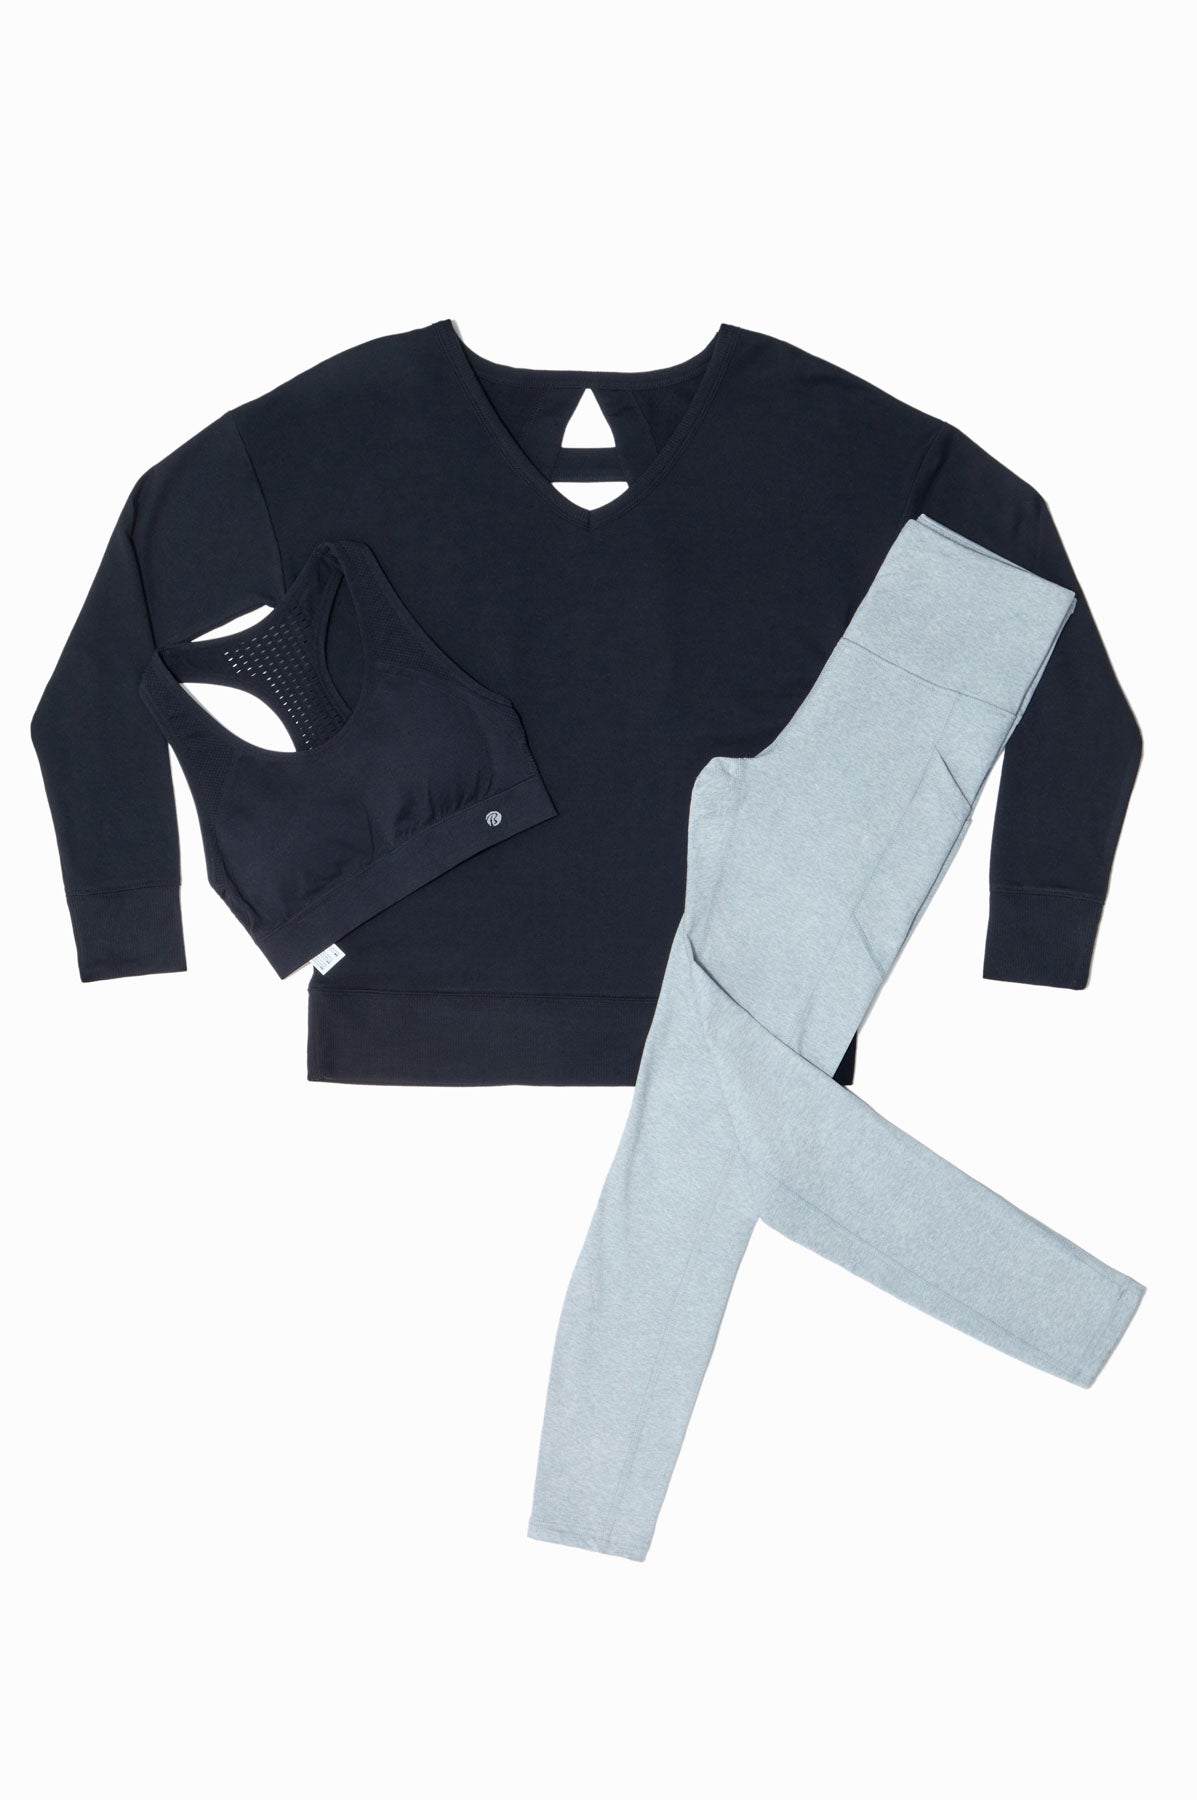 Grayscale - 3 Items